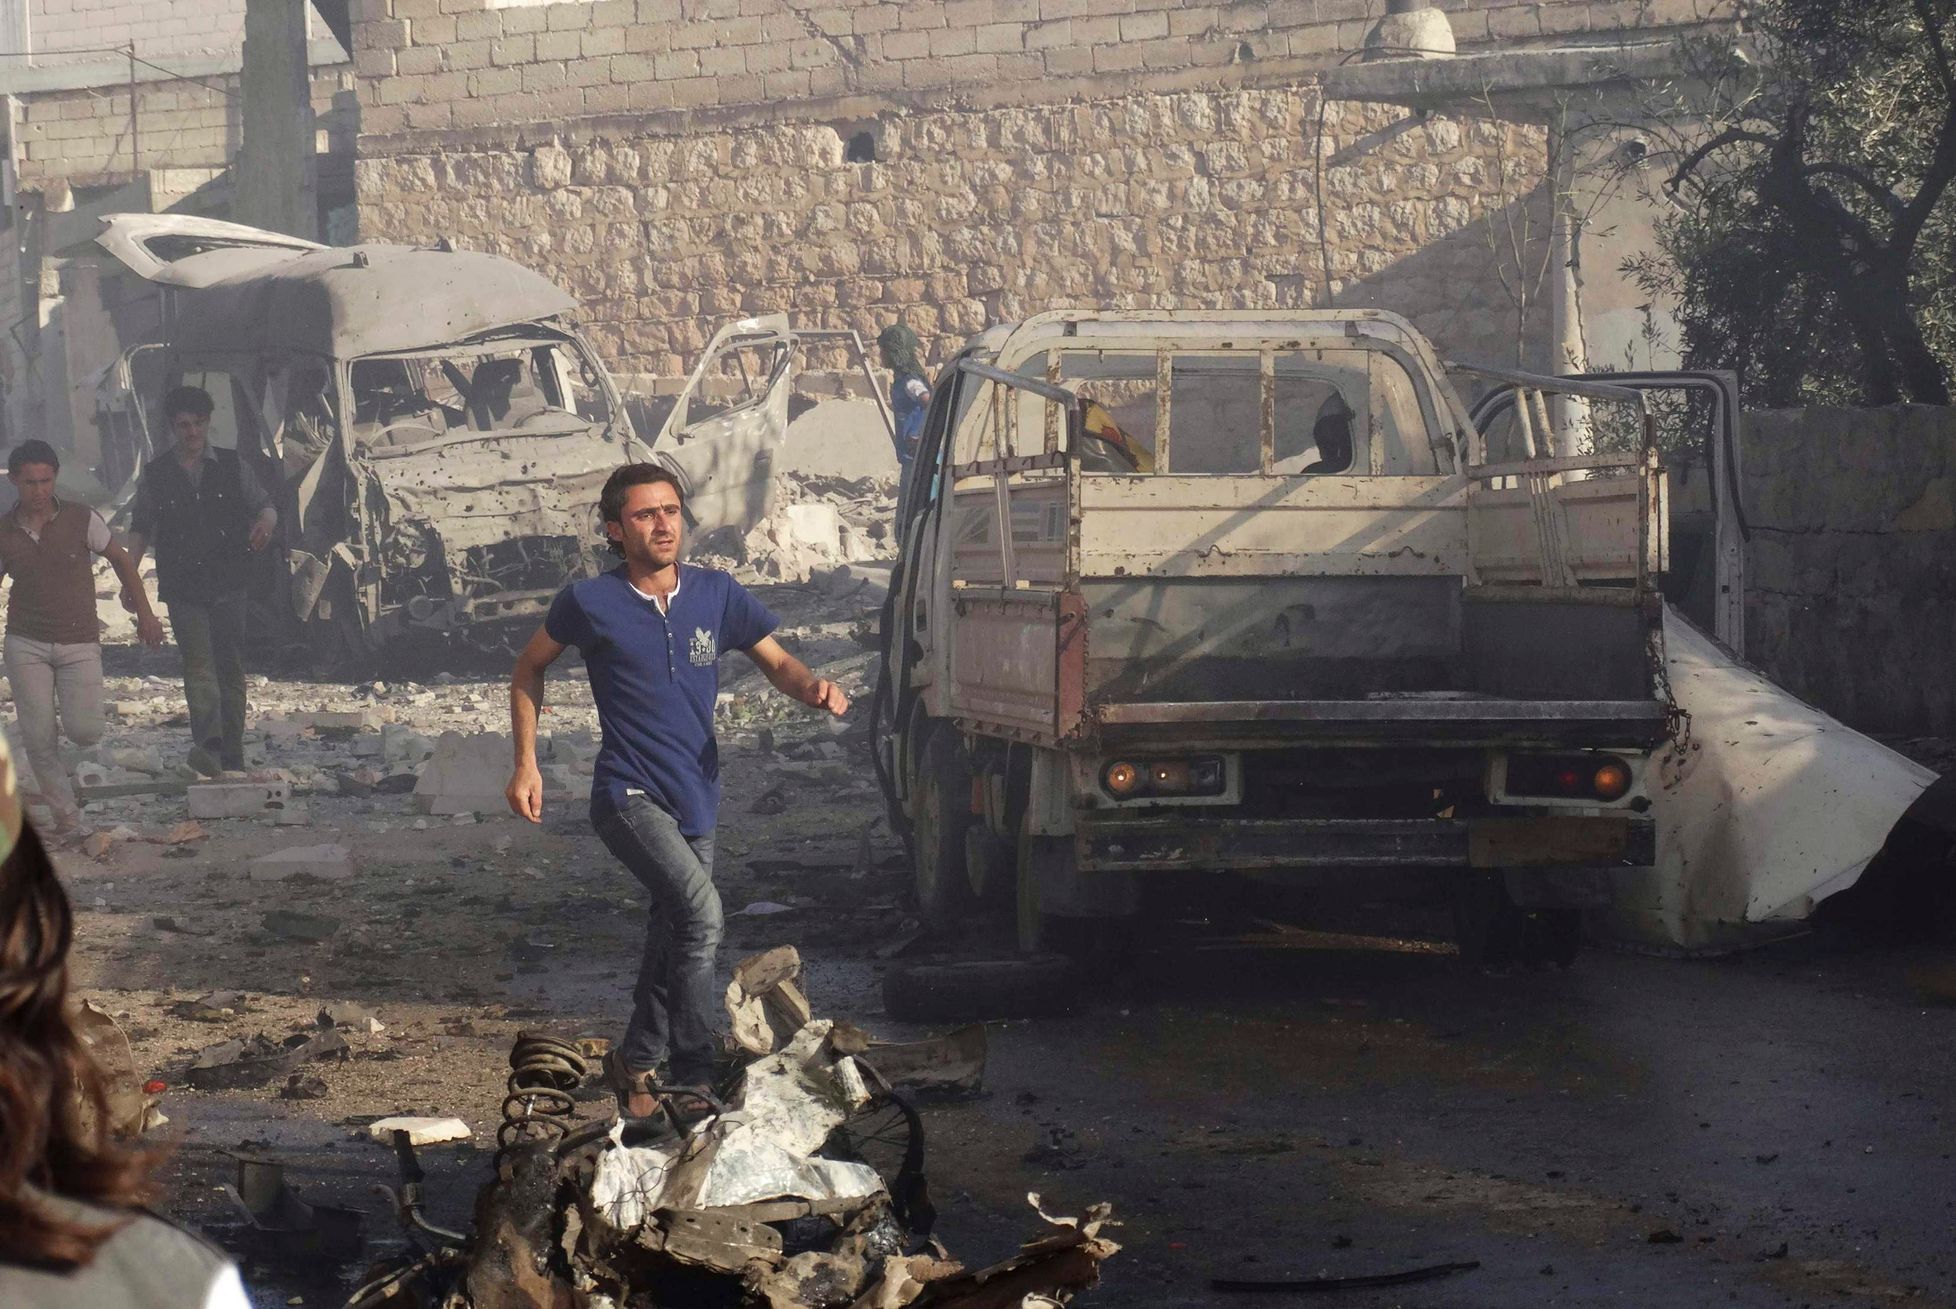 Man runs at a site hit by what activists said were barrel bombs dropped by forces loyal to Syria's President Assad in the northern town of Atareb, in Aleppo province